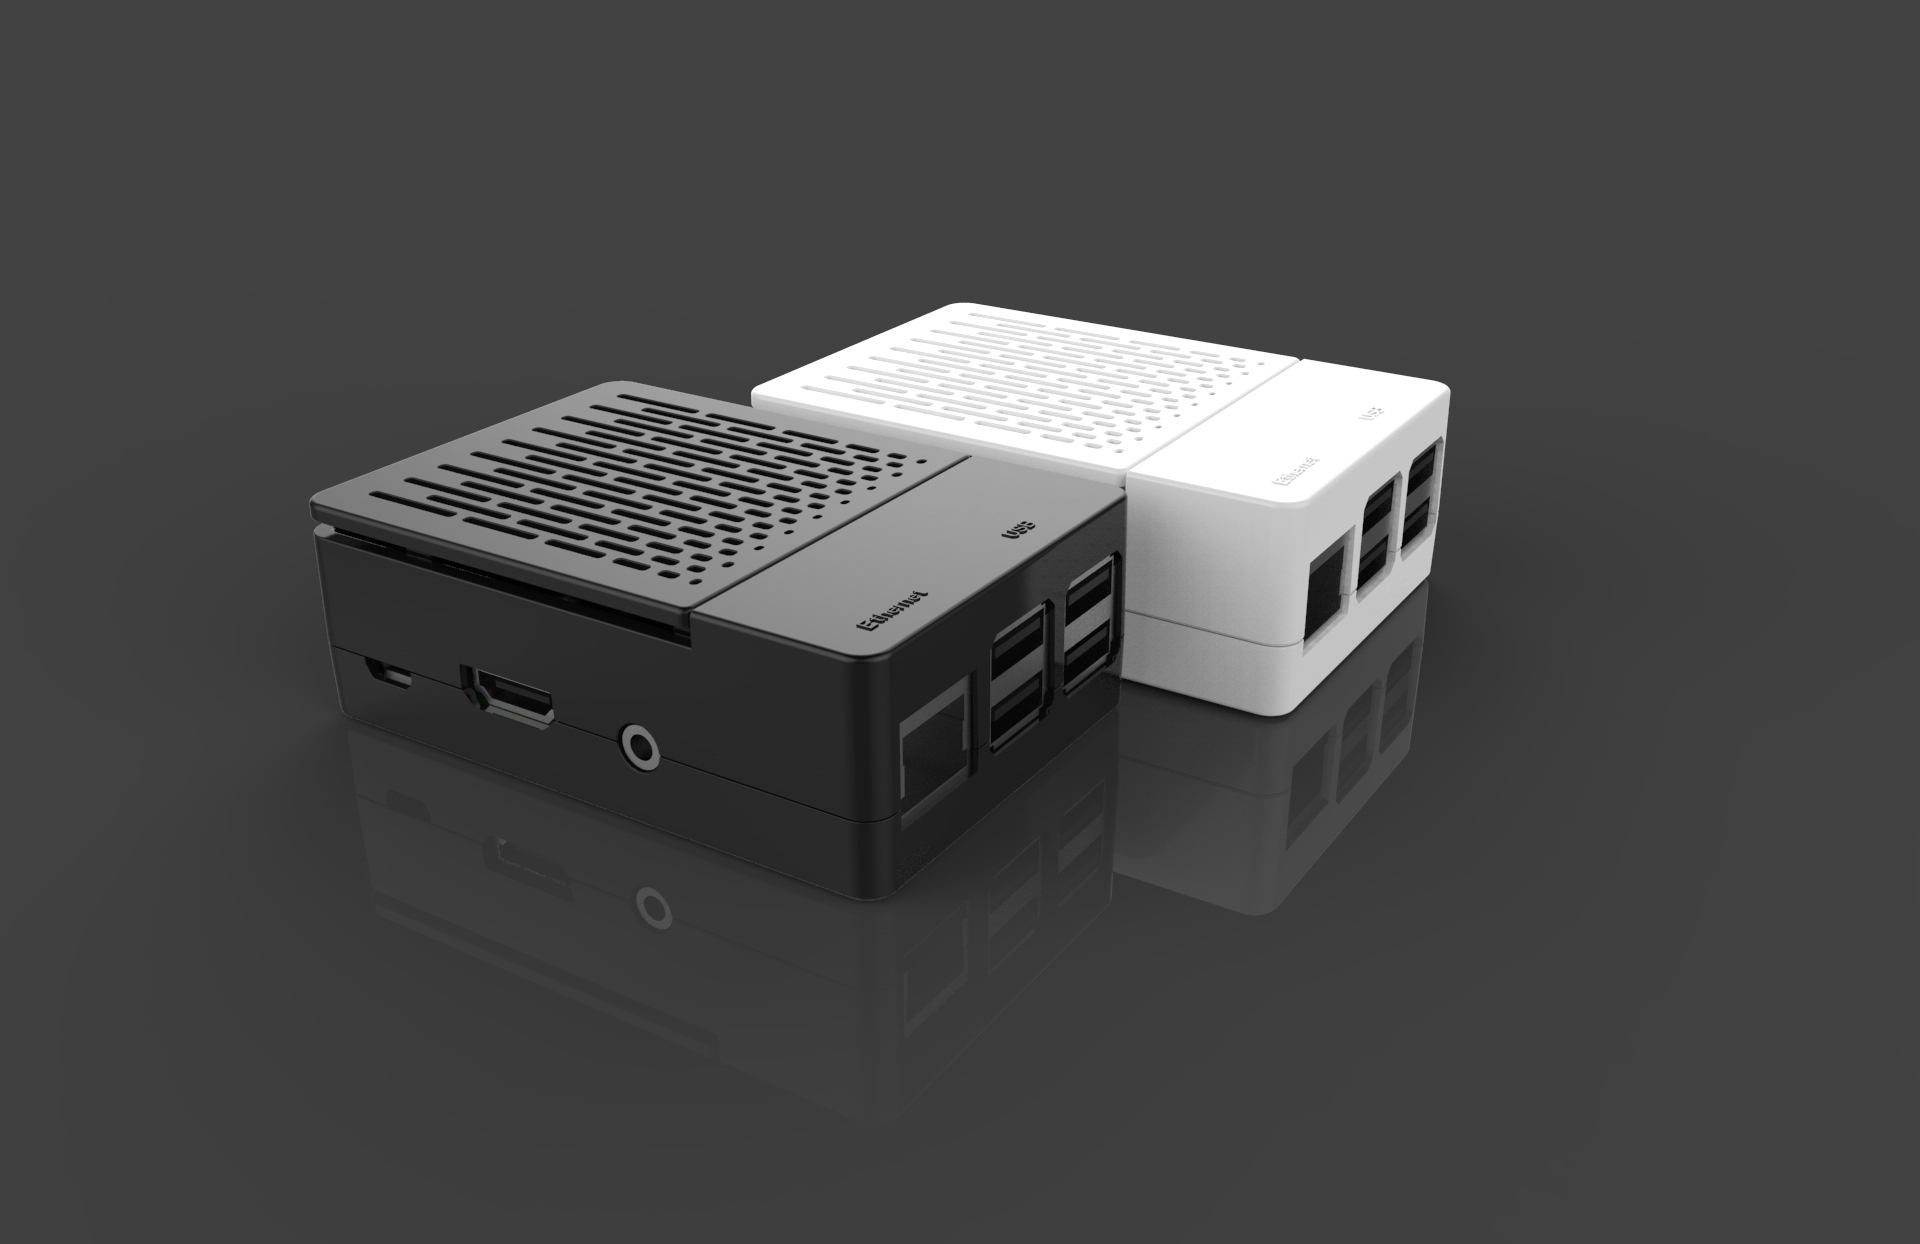 Black/White Assembled Exclouse Case + Quiet Cooling Fan + Heatsink Support GPIO or Camera For Raspberry Pi 3/2/B+ 11